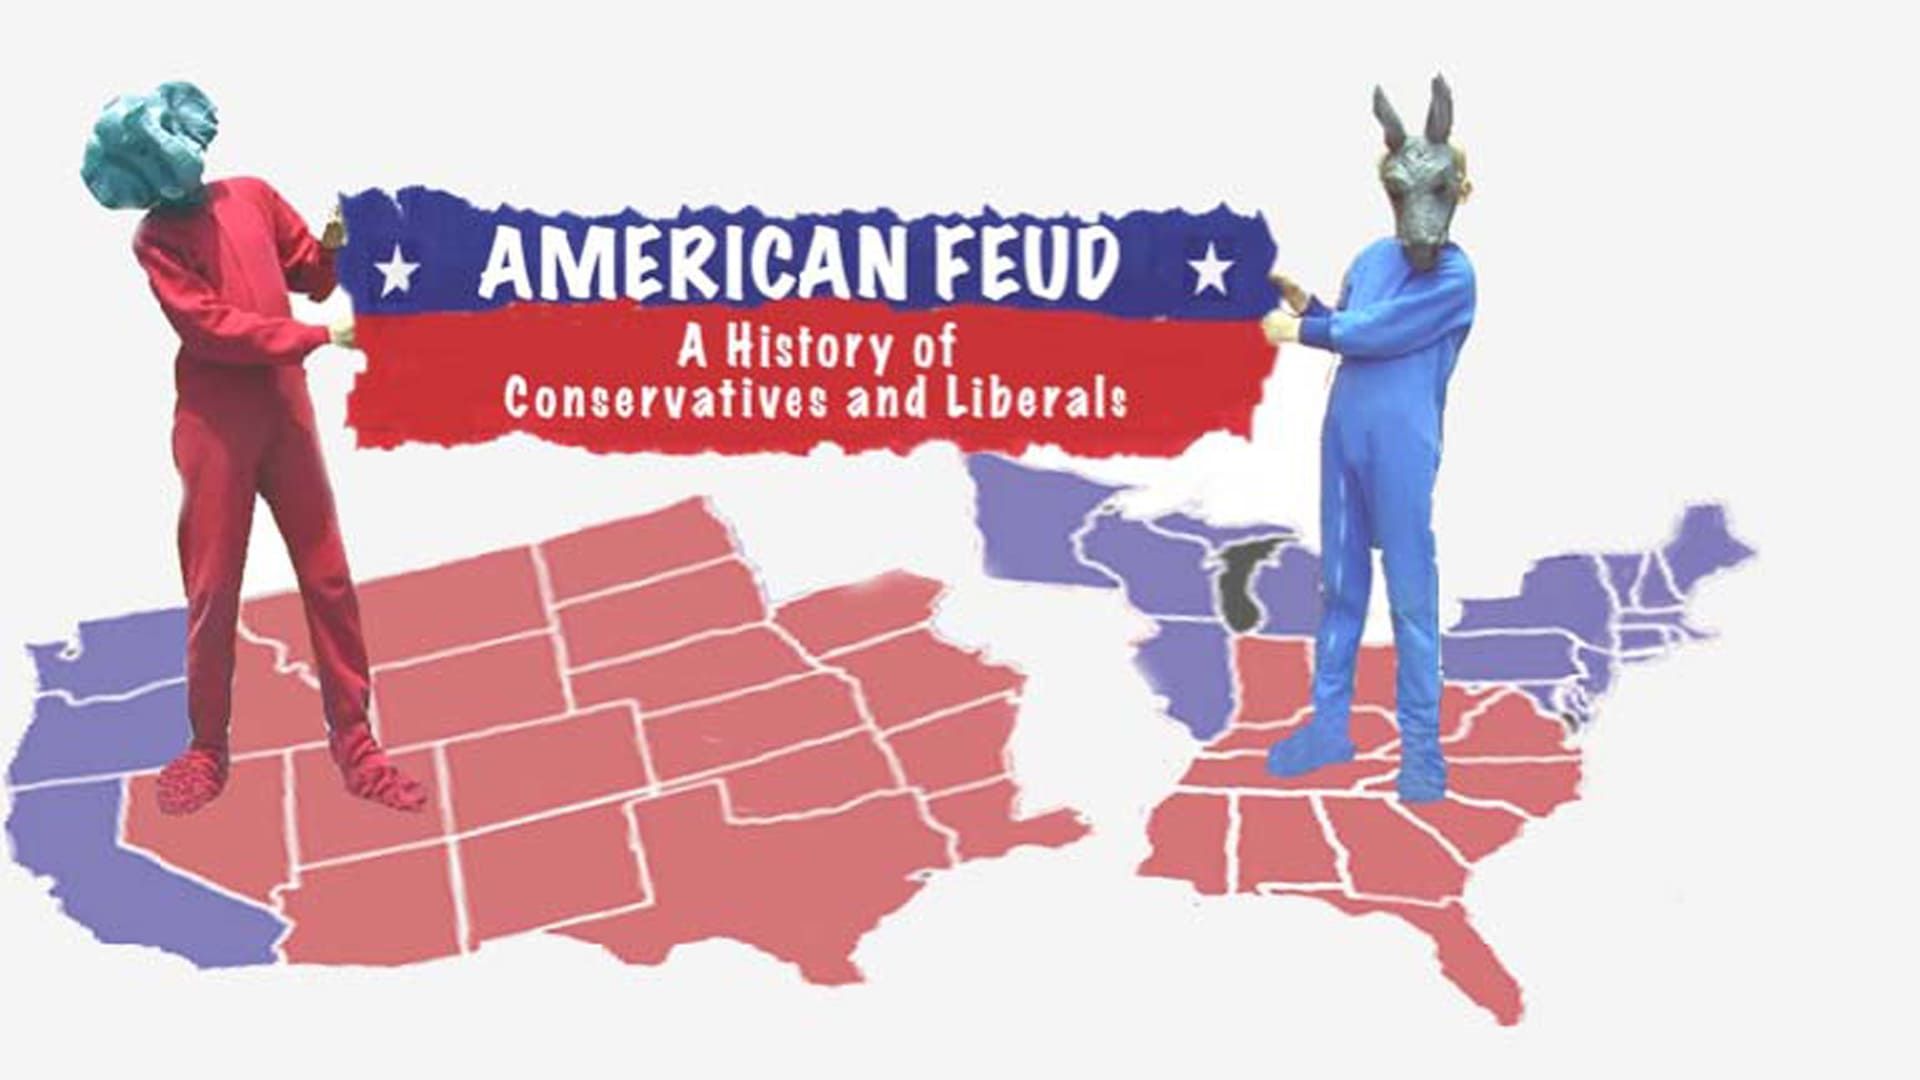 American Feud: A History of Conservatives and Liberals background